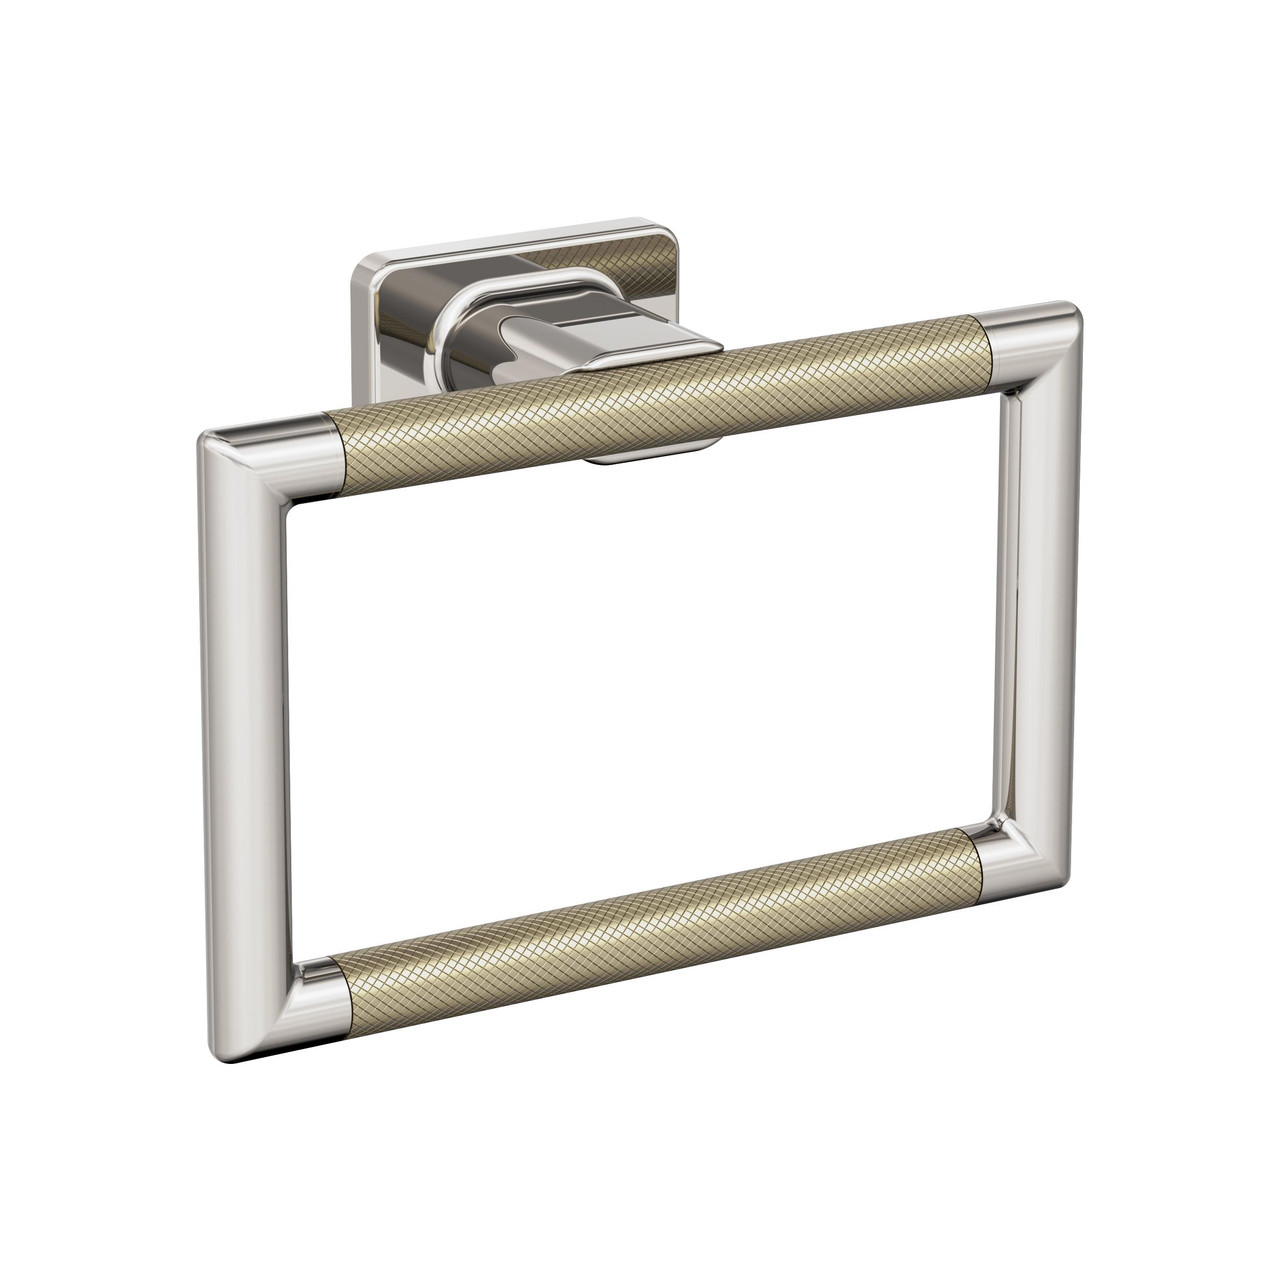 Amerock Esquire Contemporary Towel Ring 5-1/4 in (133 mm) Length BH26612